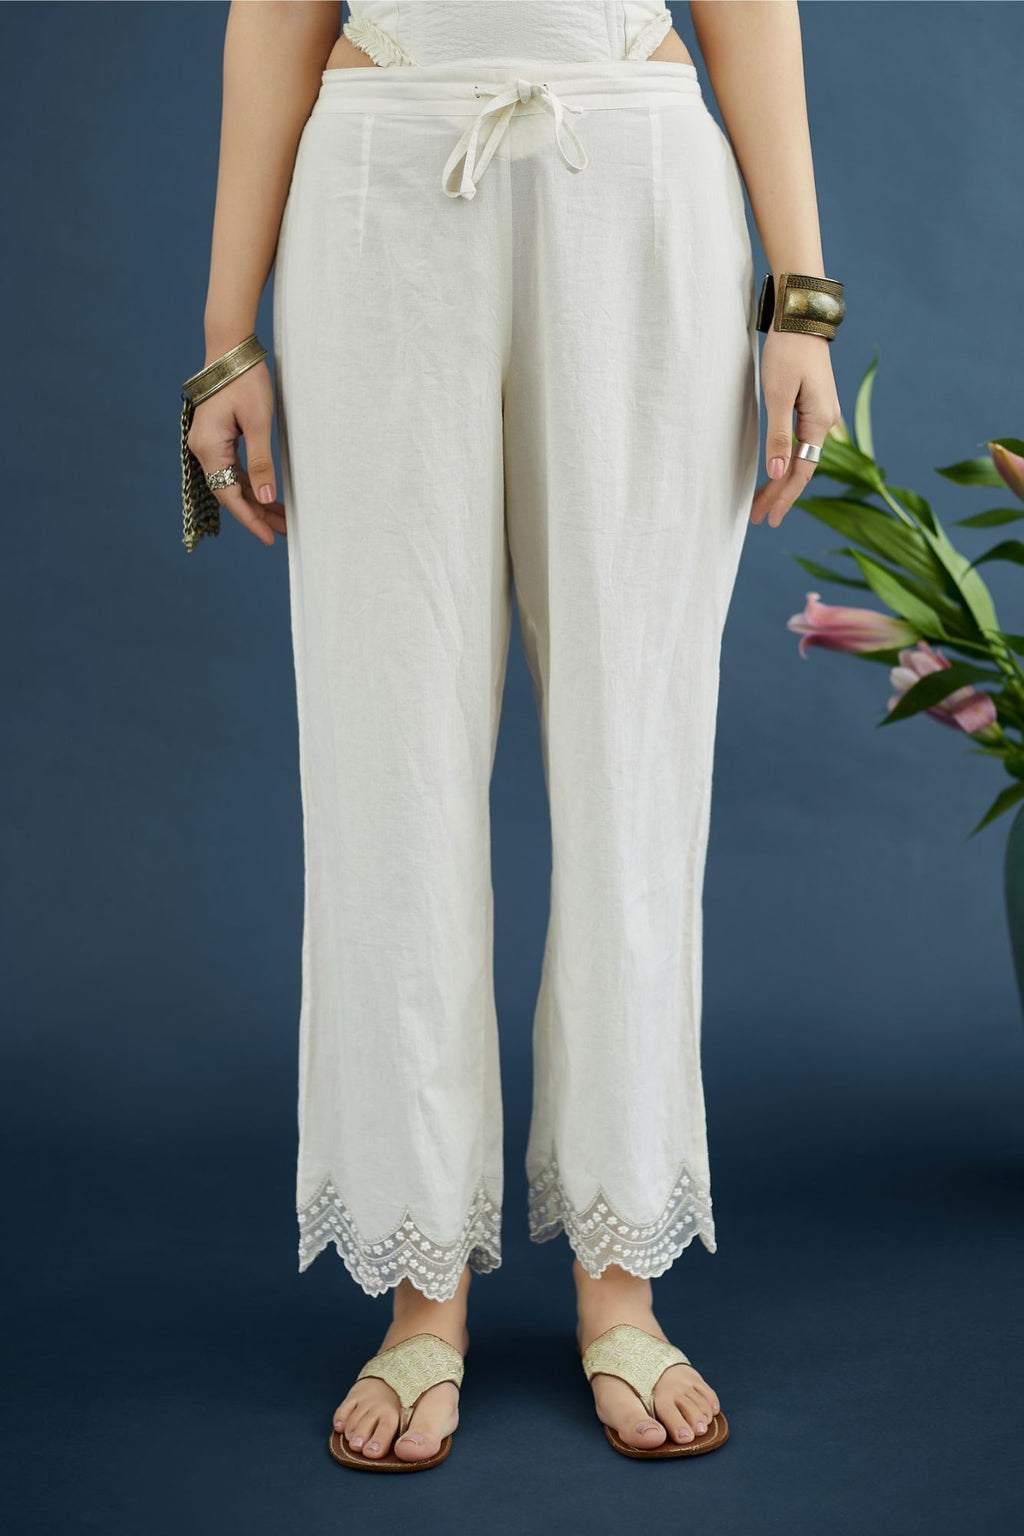 Off white straight pants with scalloped embroidery at bottom hem